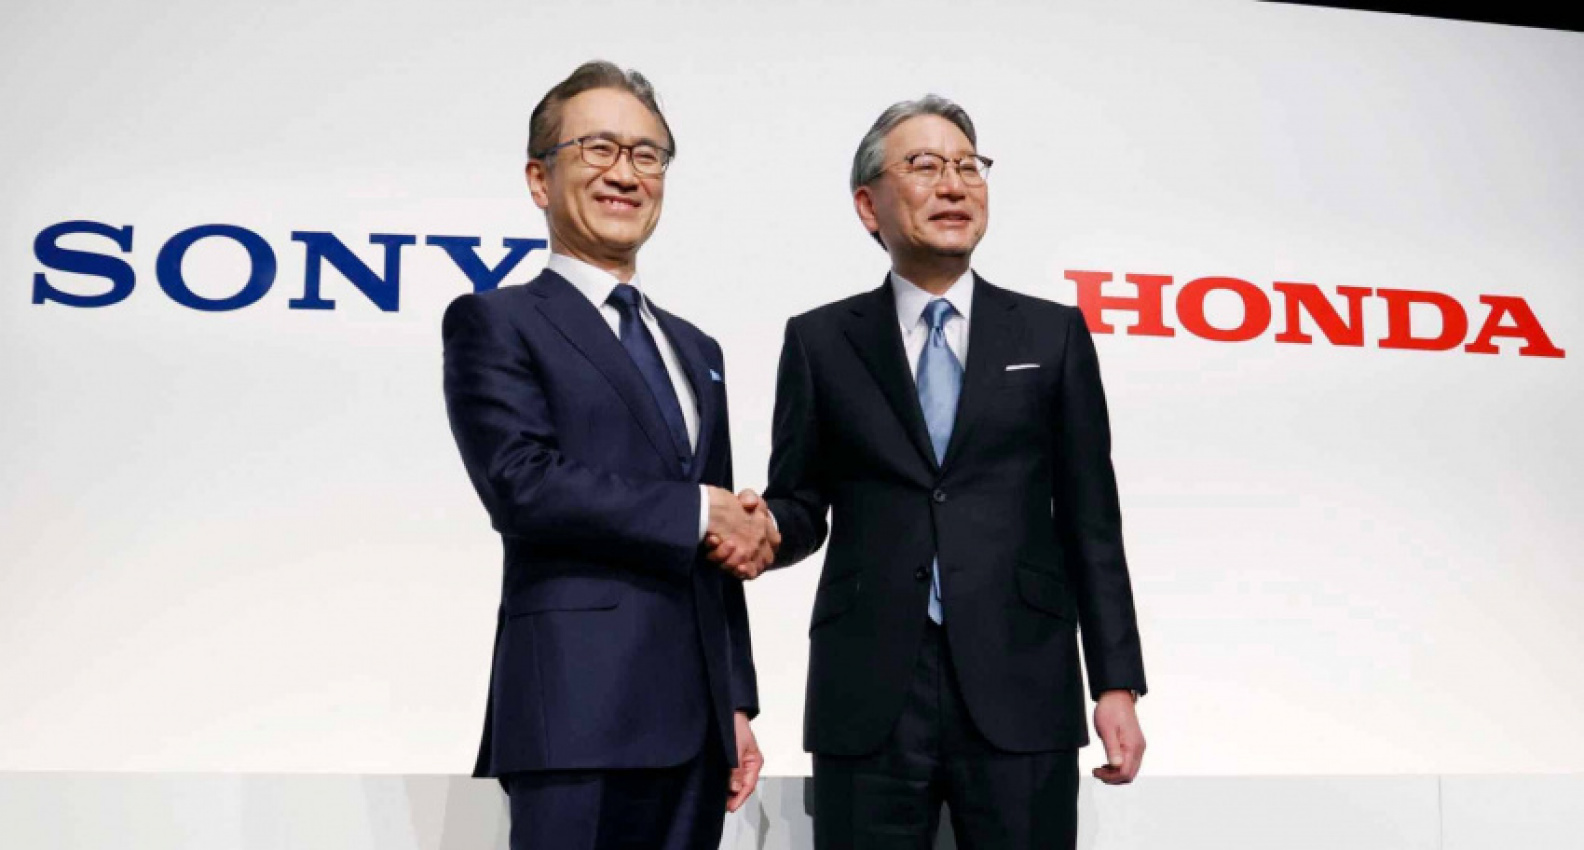 honda, reviews, sony, technology, cars, honda and sony will produce electric cars together